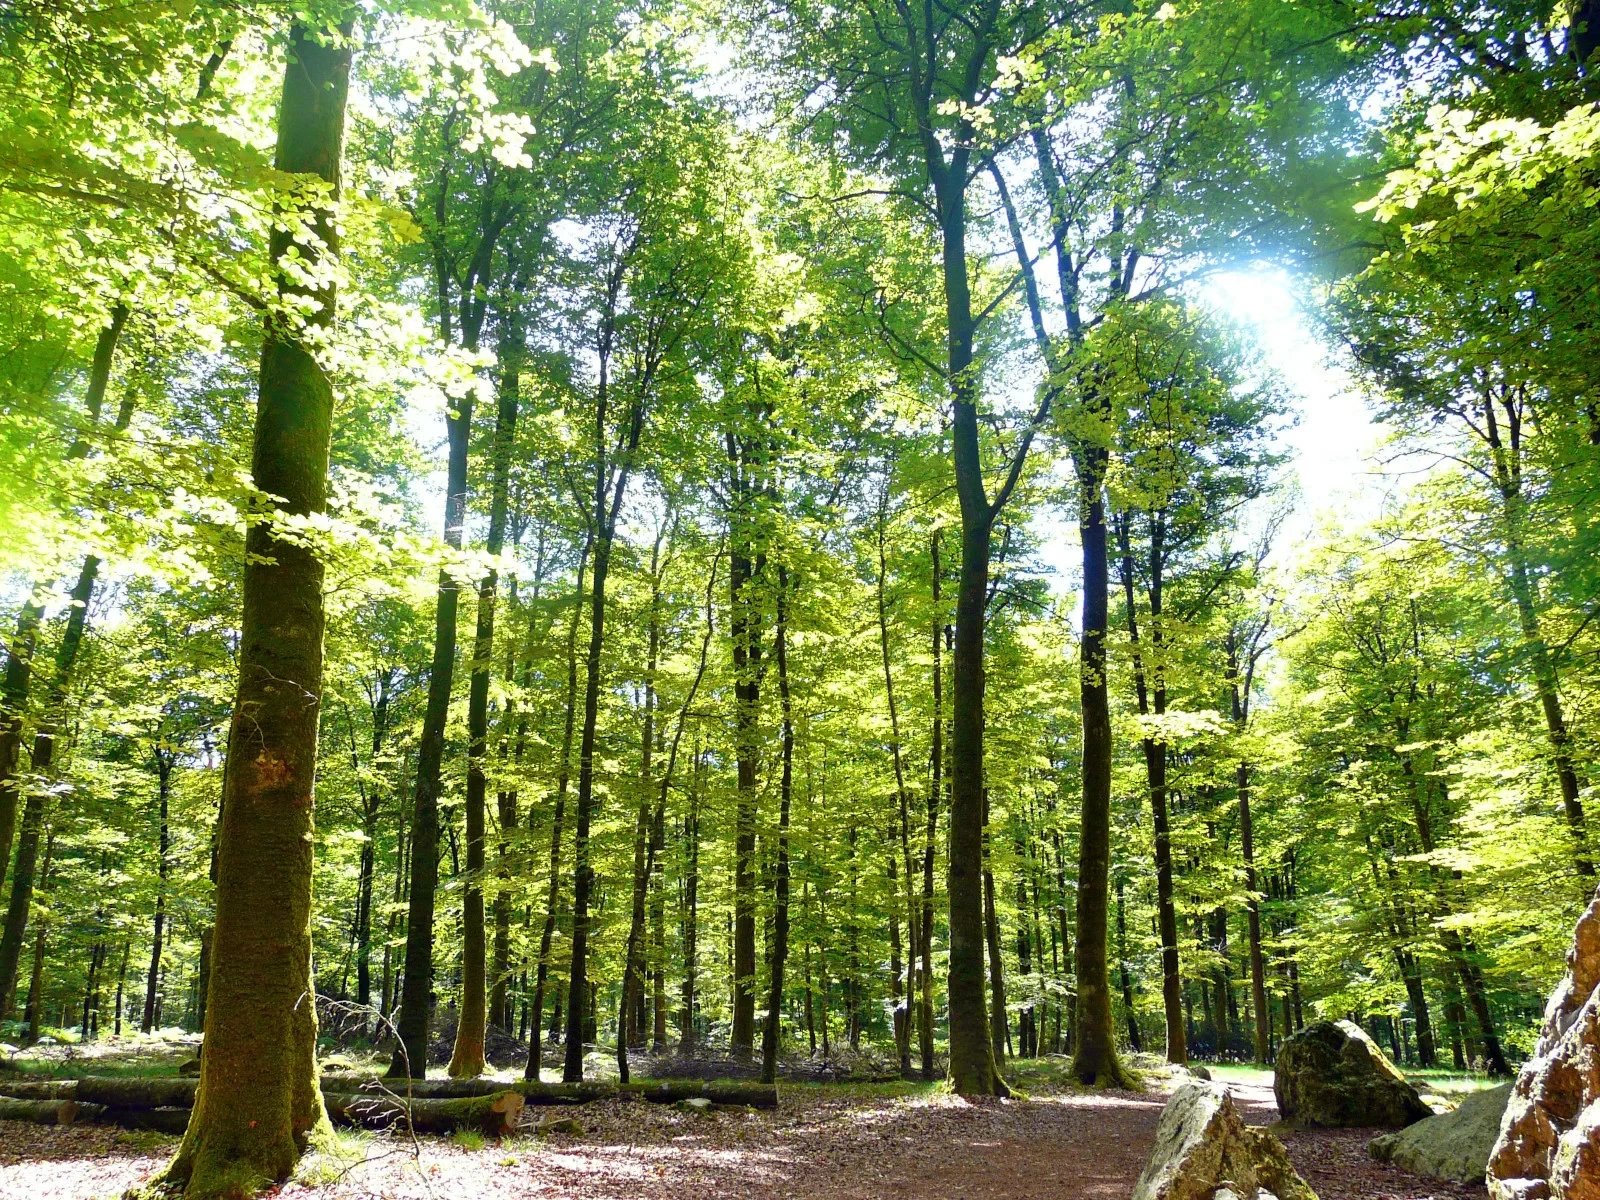 Sunny day in the Fougères forest